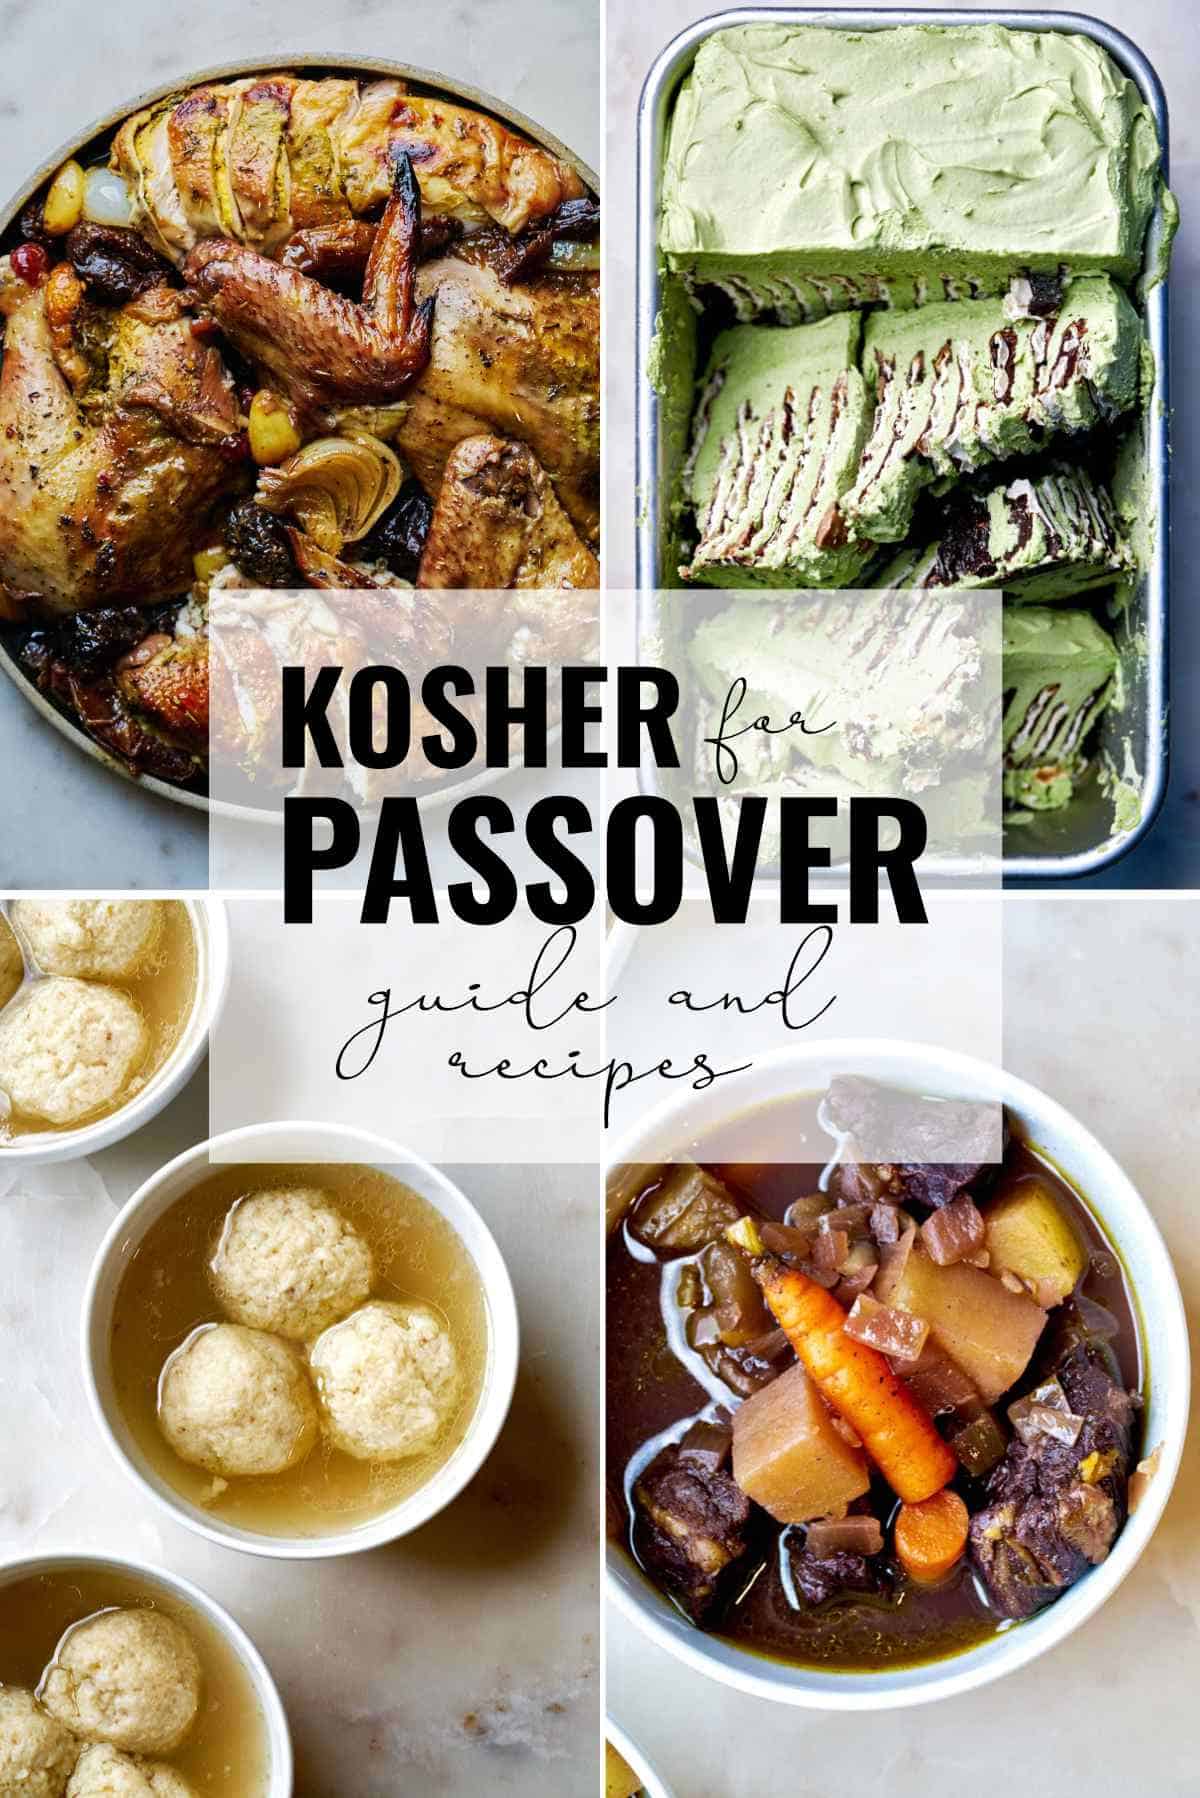 Collage of Passover dishes with title text.